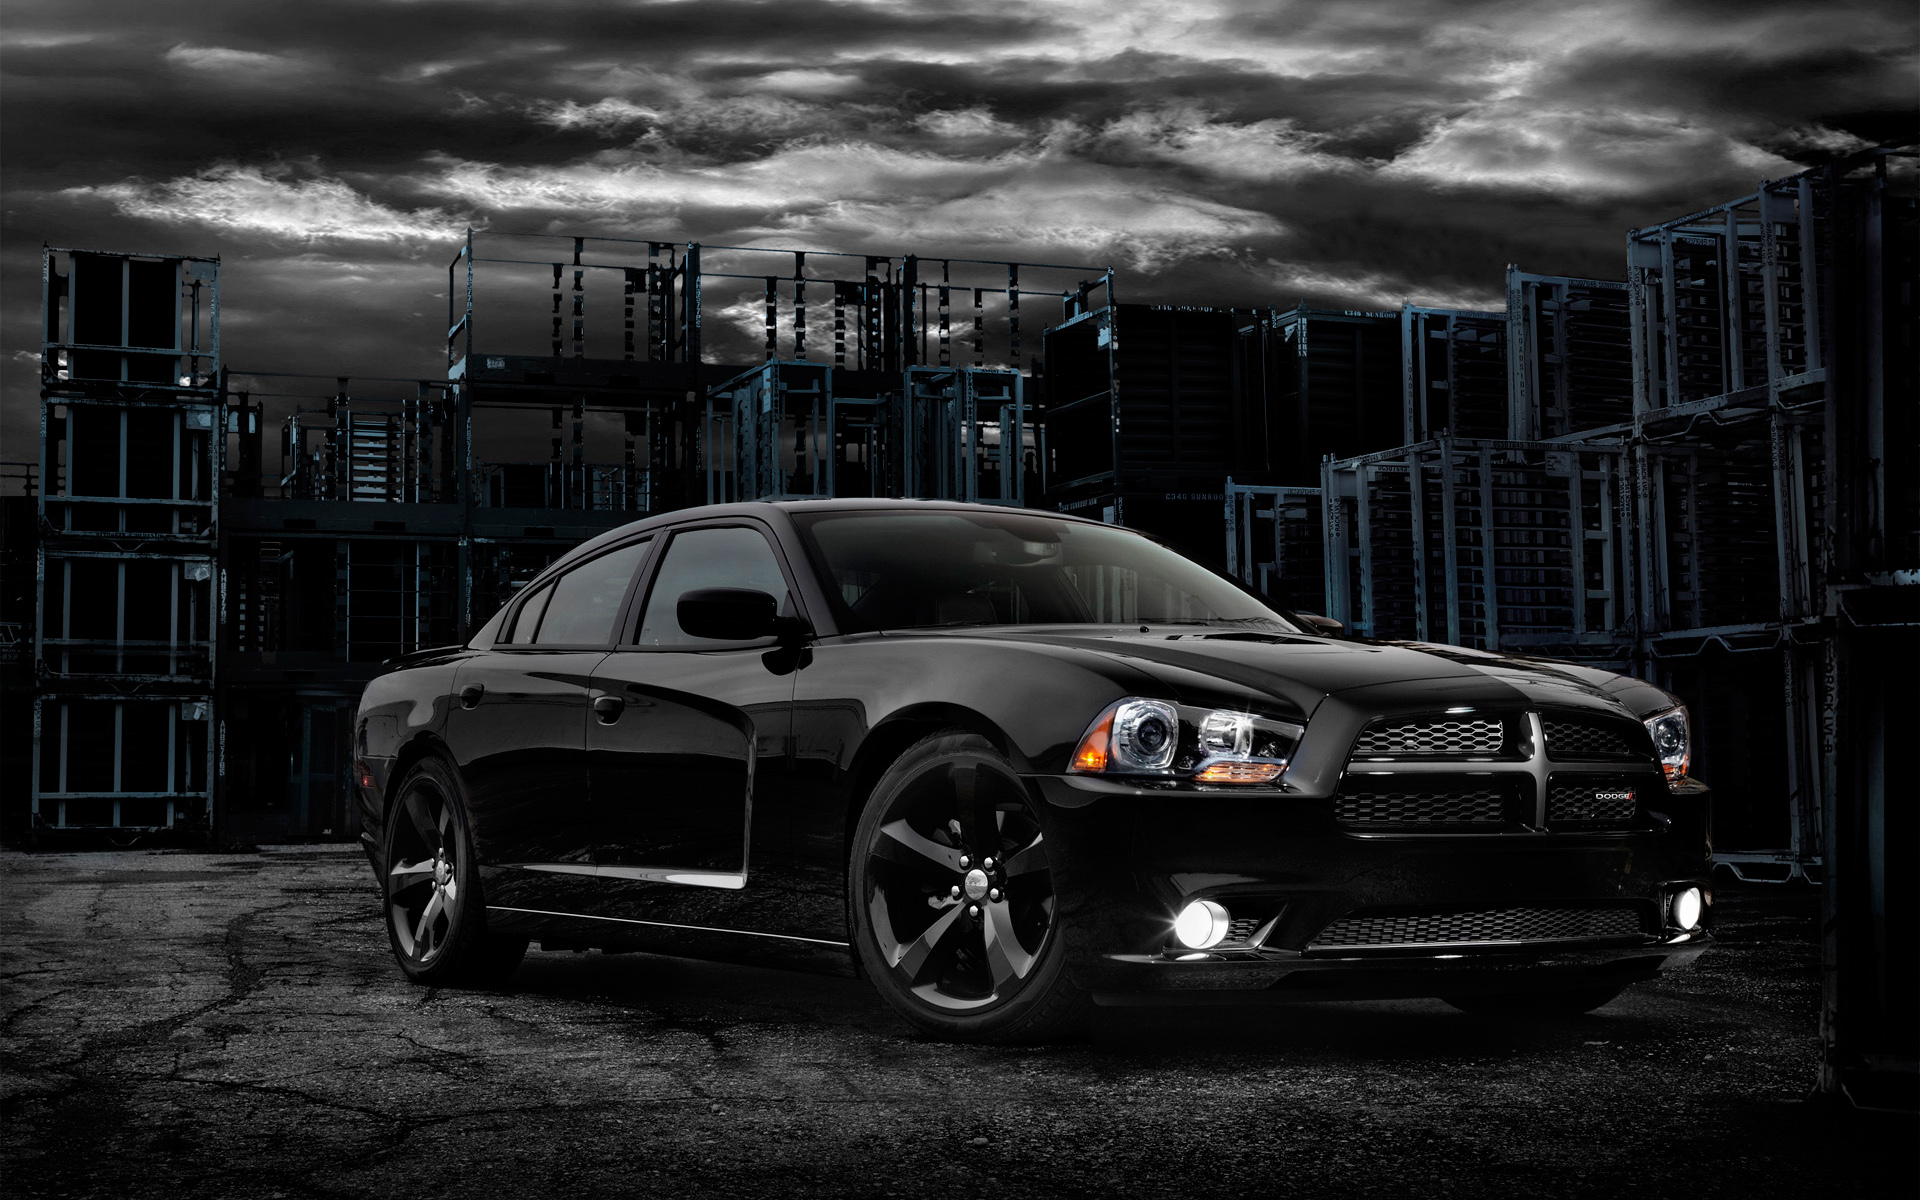 2012 Dodge Charger 2 Wallpaper | HD Car Wallpapers | ID #2587